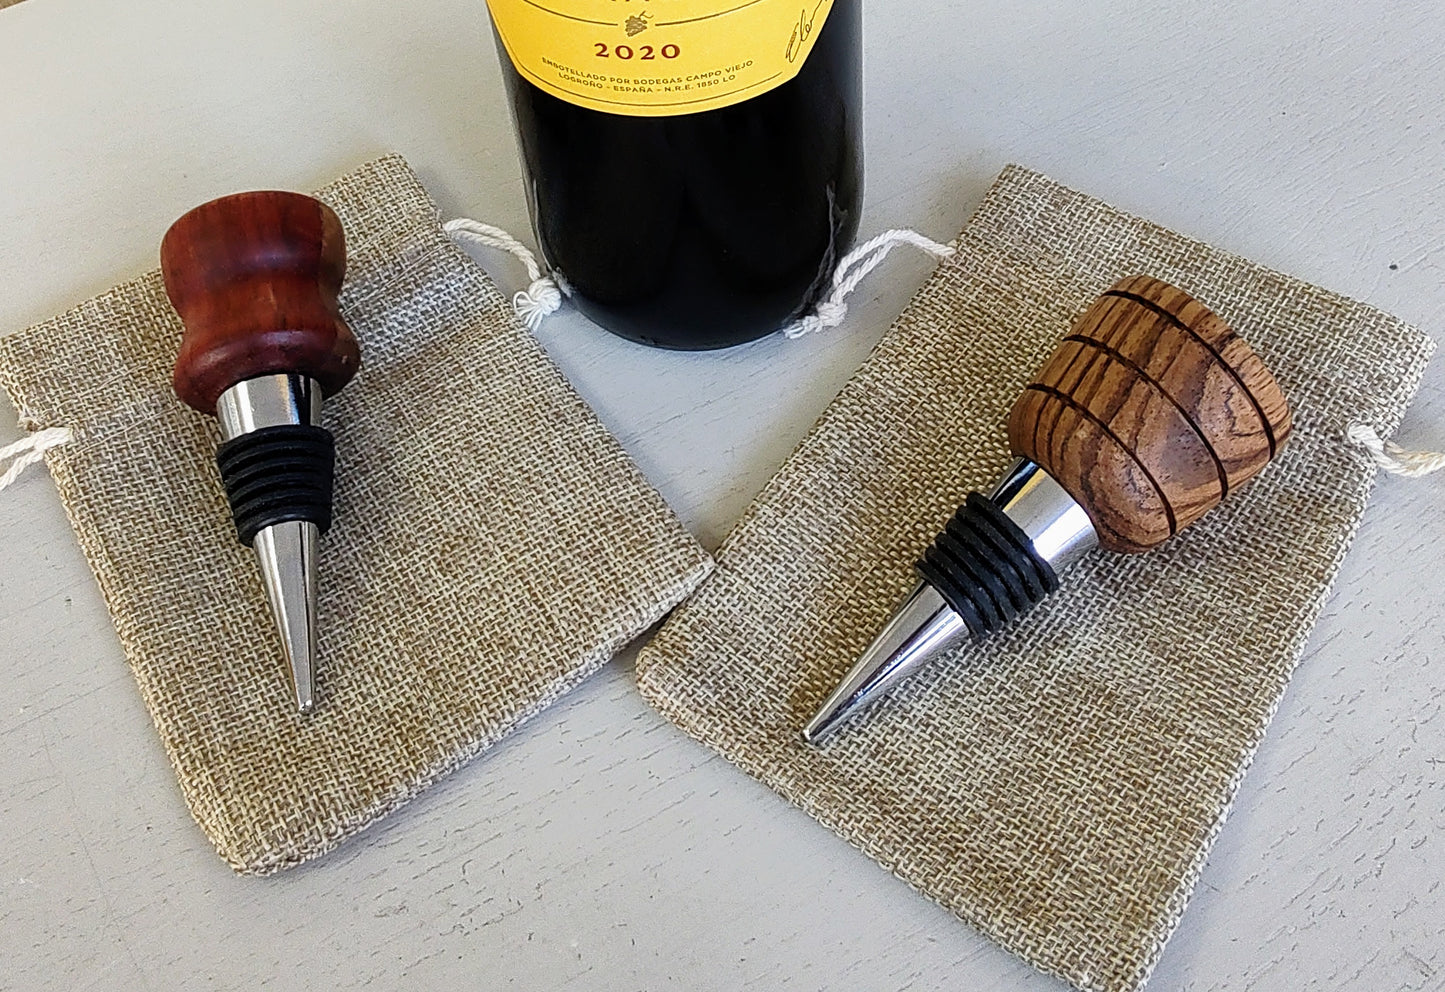 From The Shed- Hand Turned Reclaimed Wooden Wine Bottle Stopper, Purple Heart